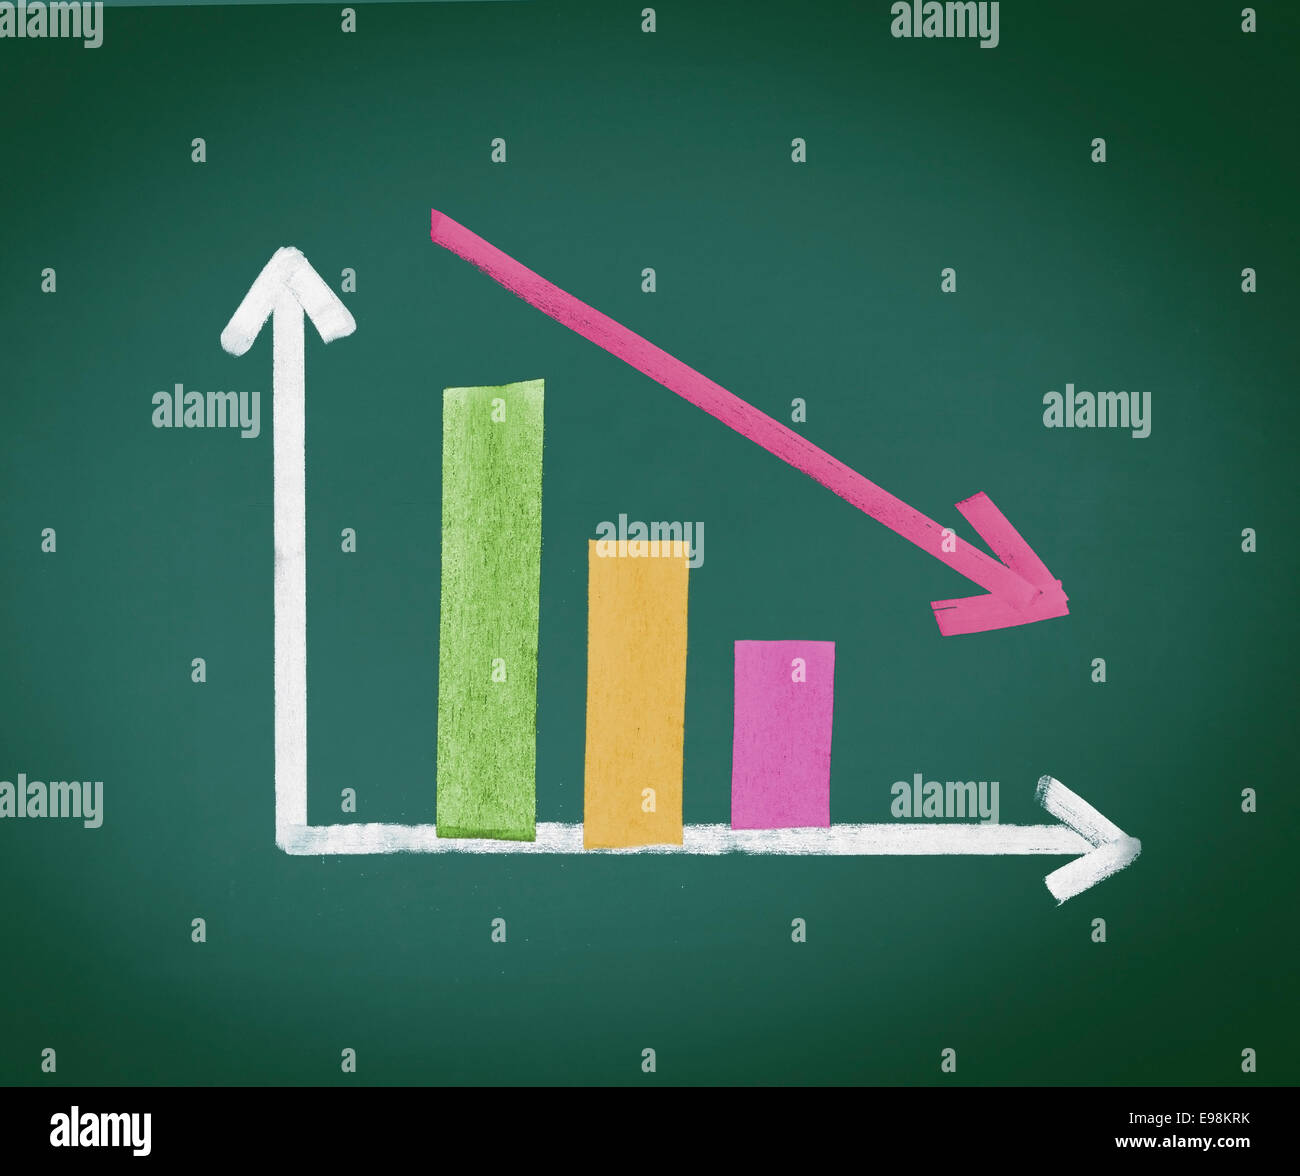 Colored Decreasing Bar Graph with two bars and and arrow decreasing in size over time, handdrawn in chalk on a chalkboard Stock Photo